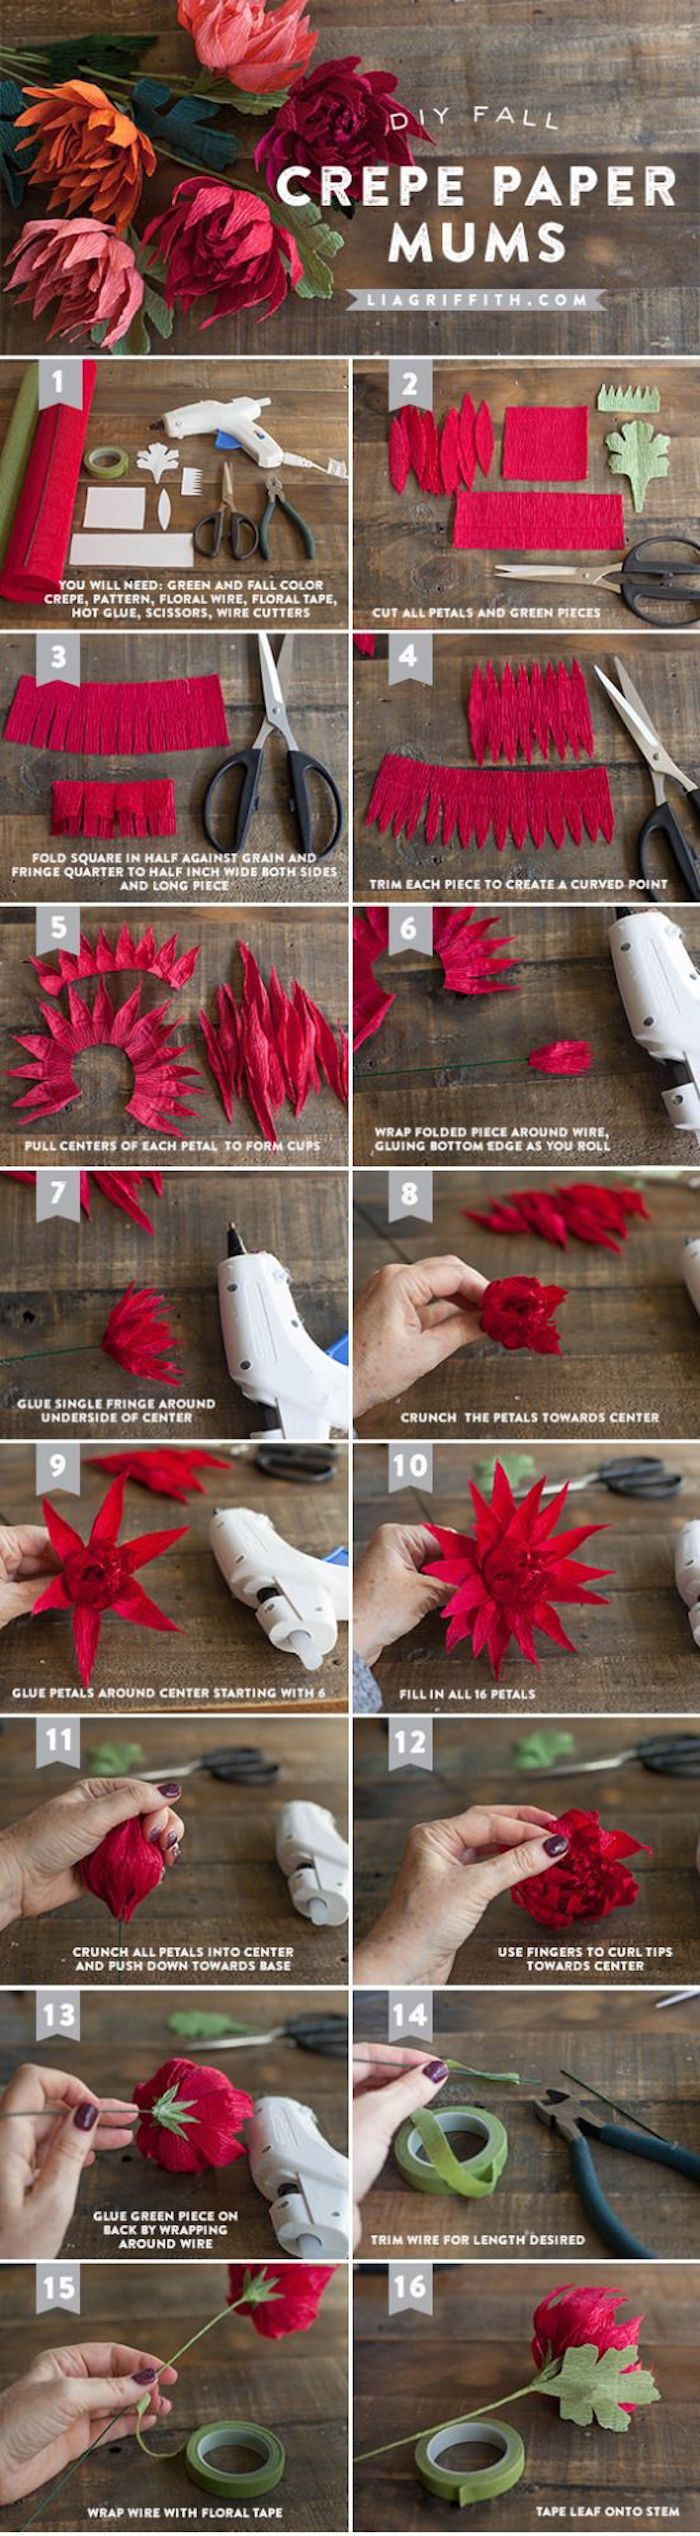 how to make mums out of crepe paper, photo collage of step by step diy tutorial, how to make flowers out of paper